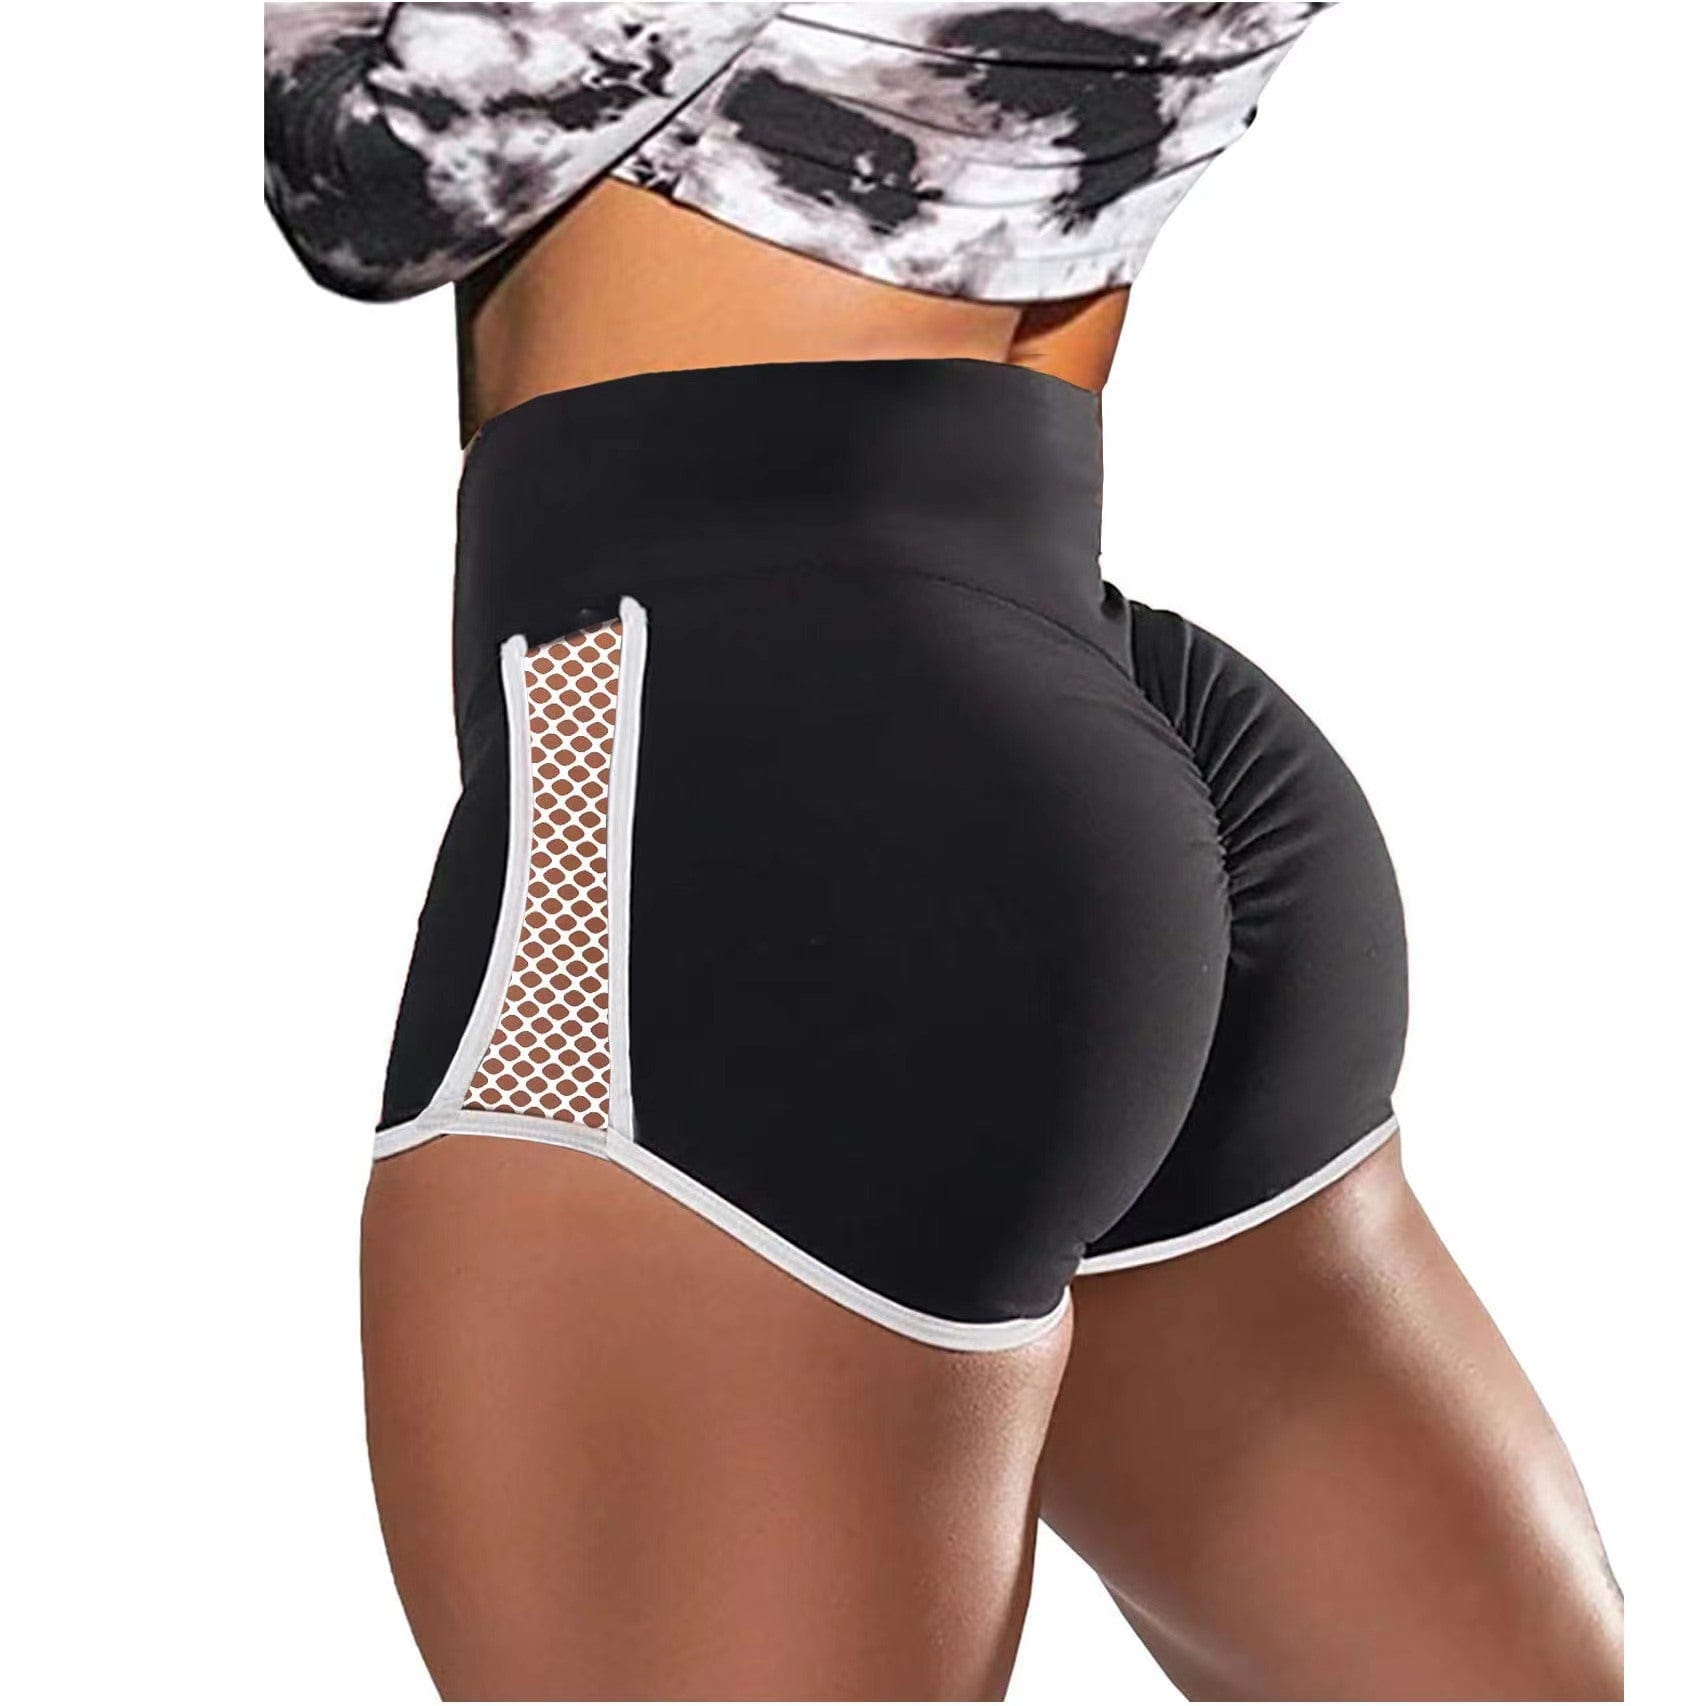 ALLRJ Black / L Cross-border European And American Foreign Trade Shorts High Waist Shaping Shorts Fitness Sports Pants Hollow Out Stitching Shorts